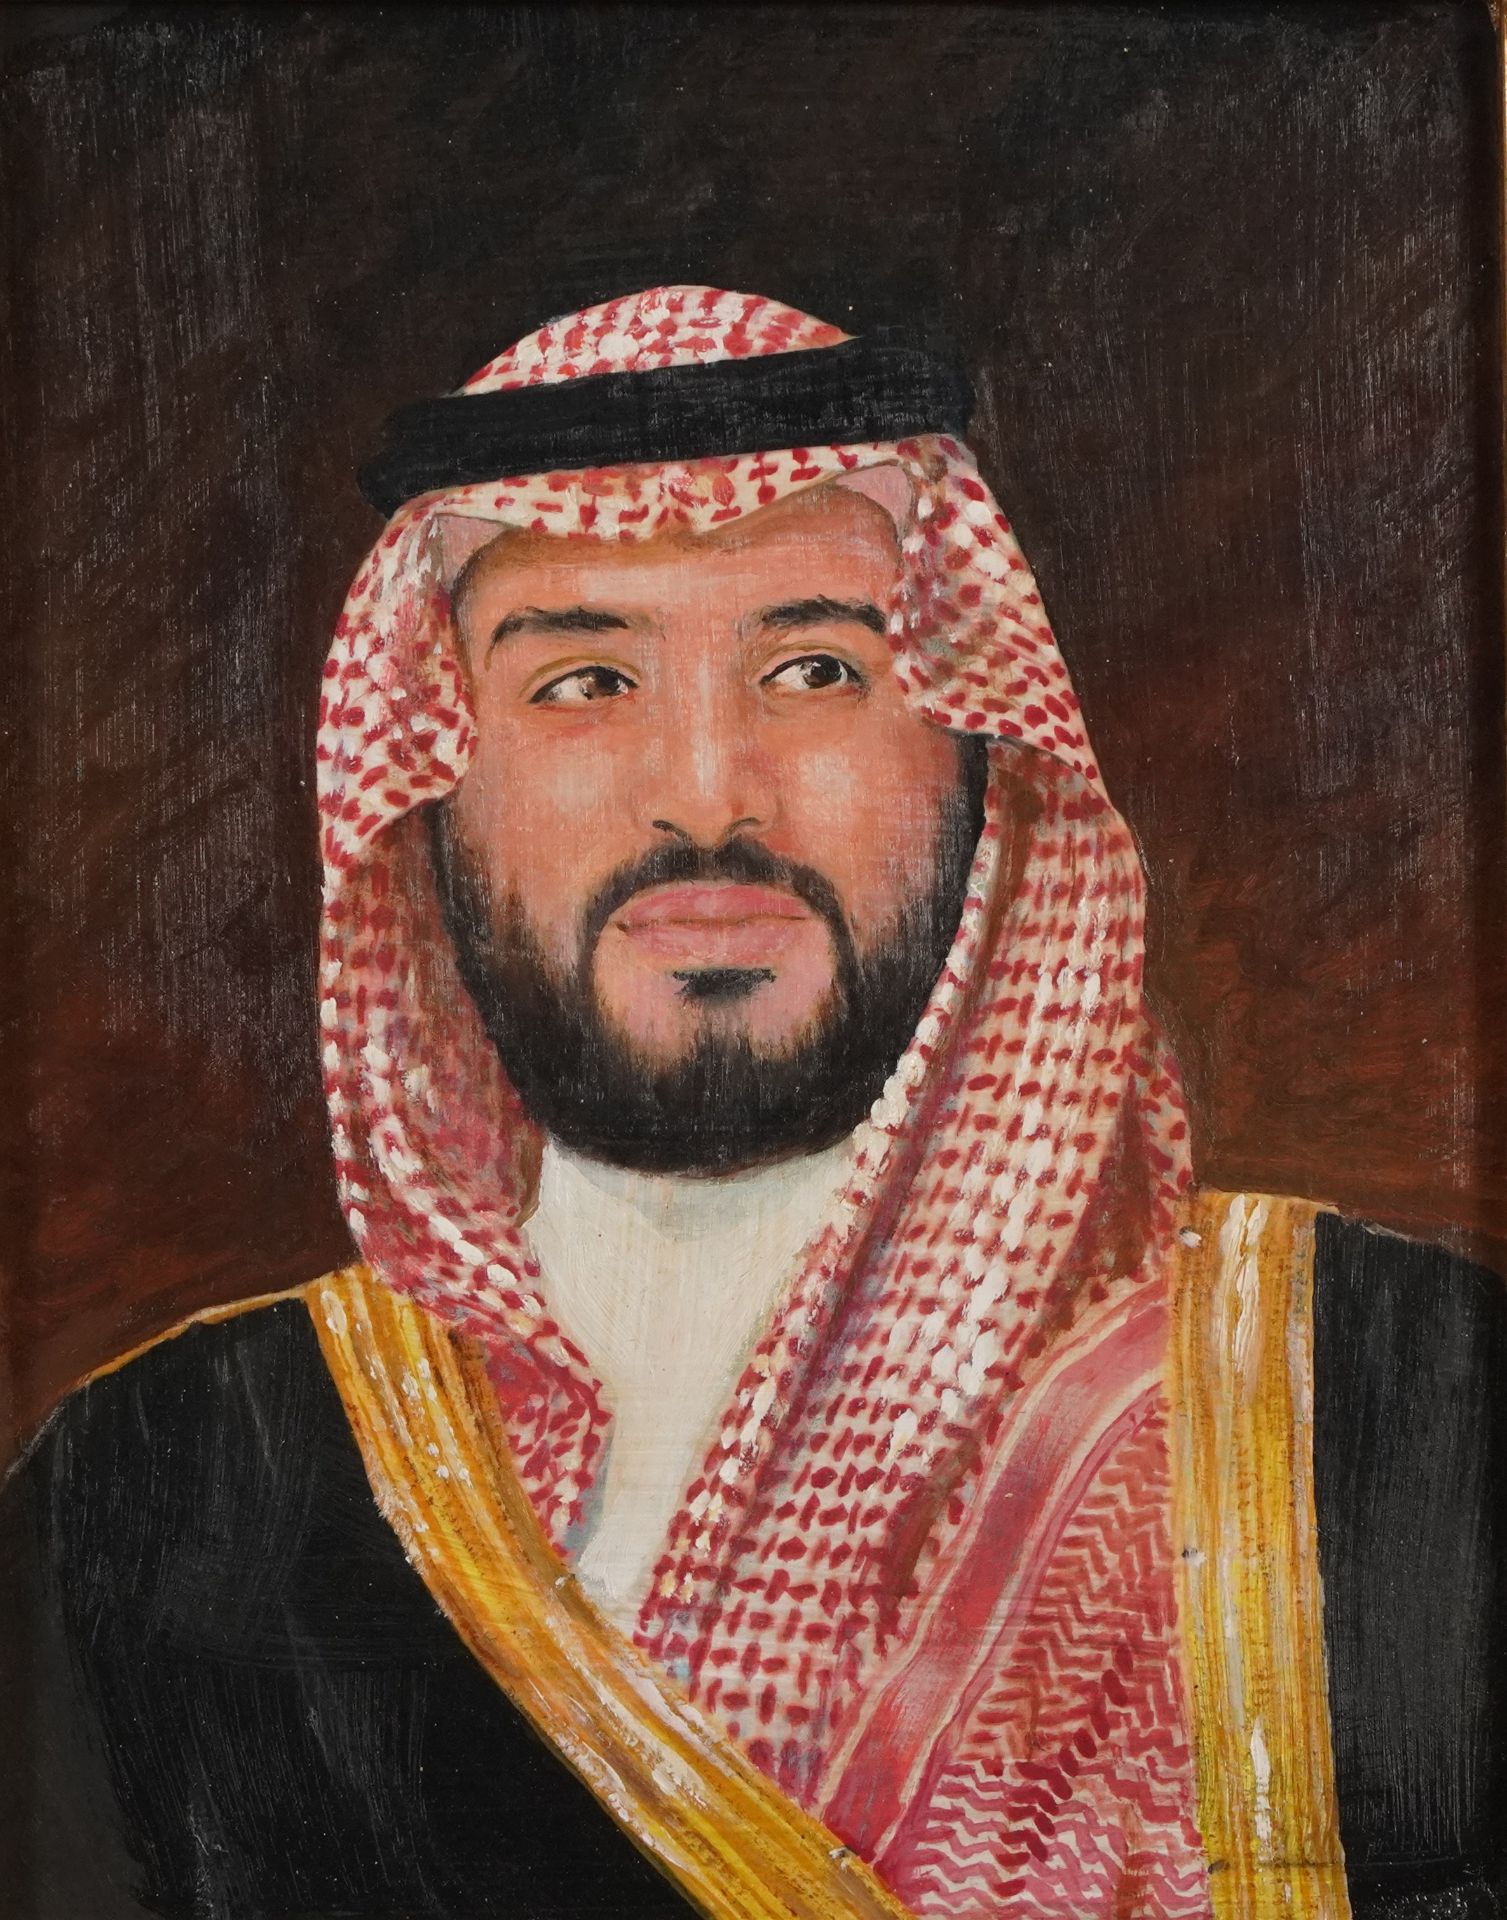 Portraits of Salman of Saudi Arabia, two pictures, framed, the largest 34cm x 26.5cm excluding the - Image 2 of 7